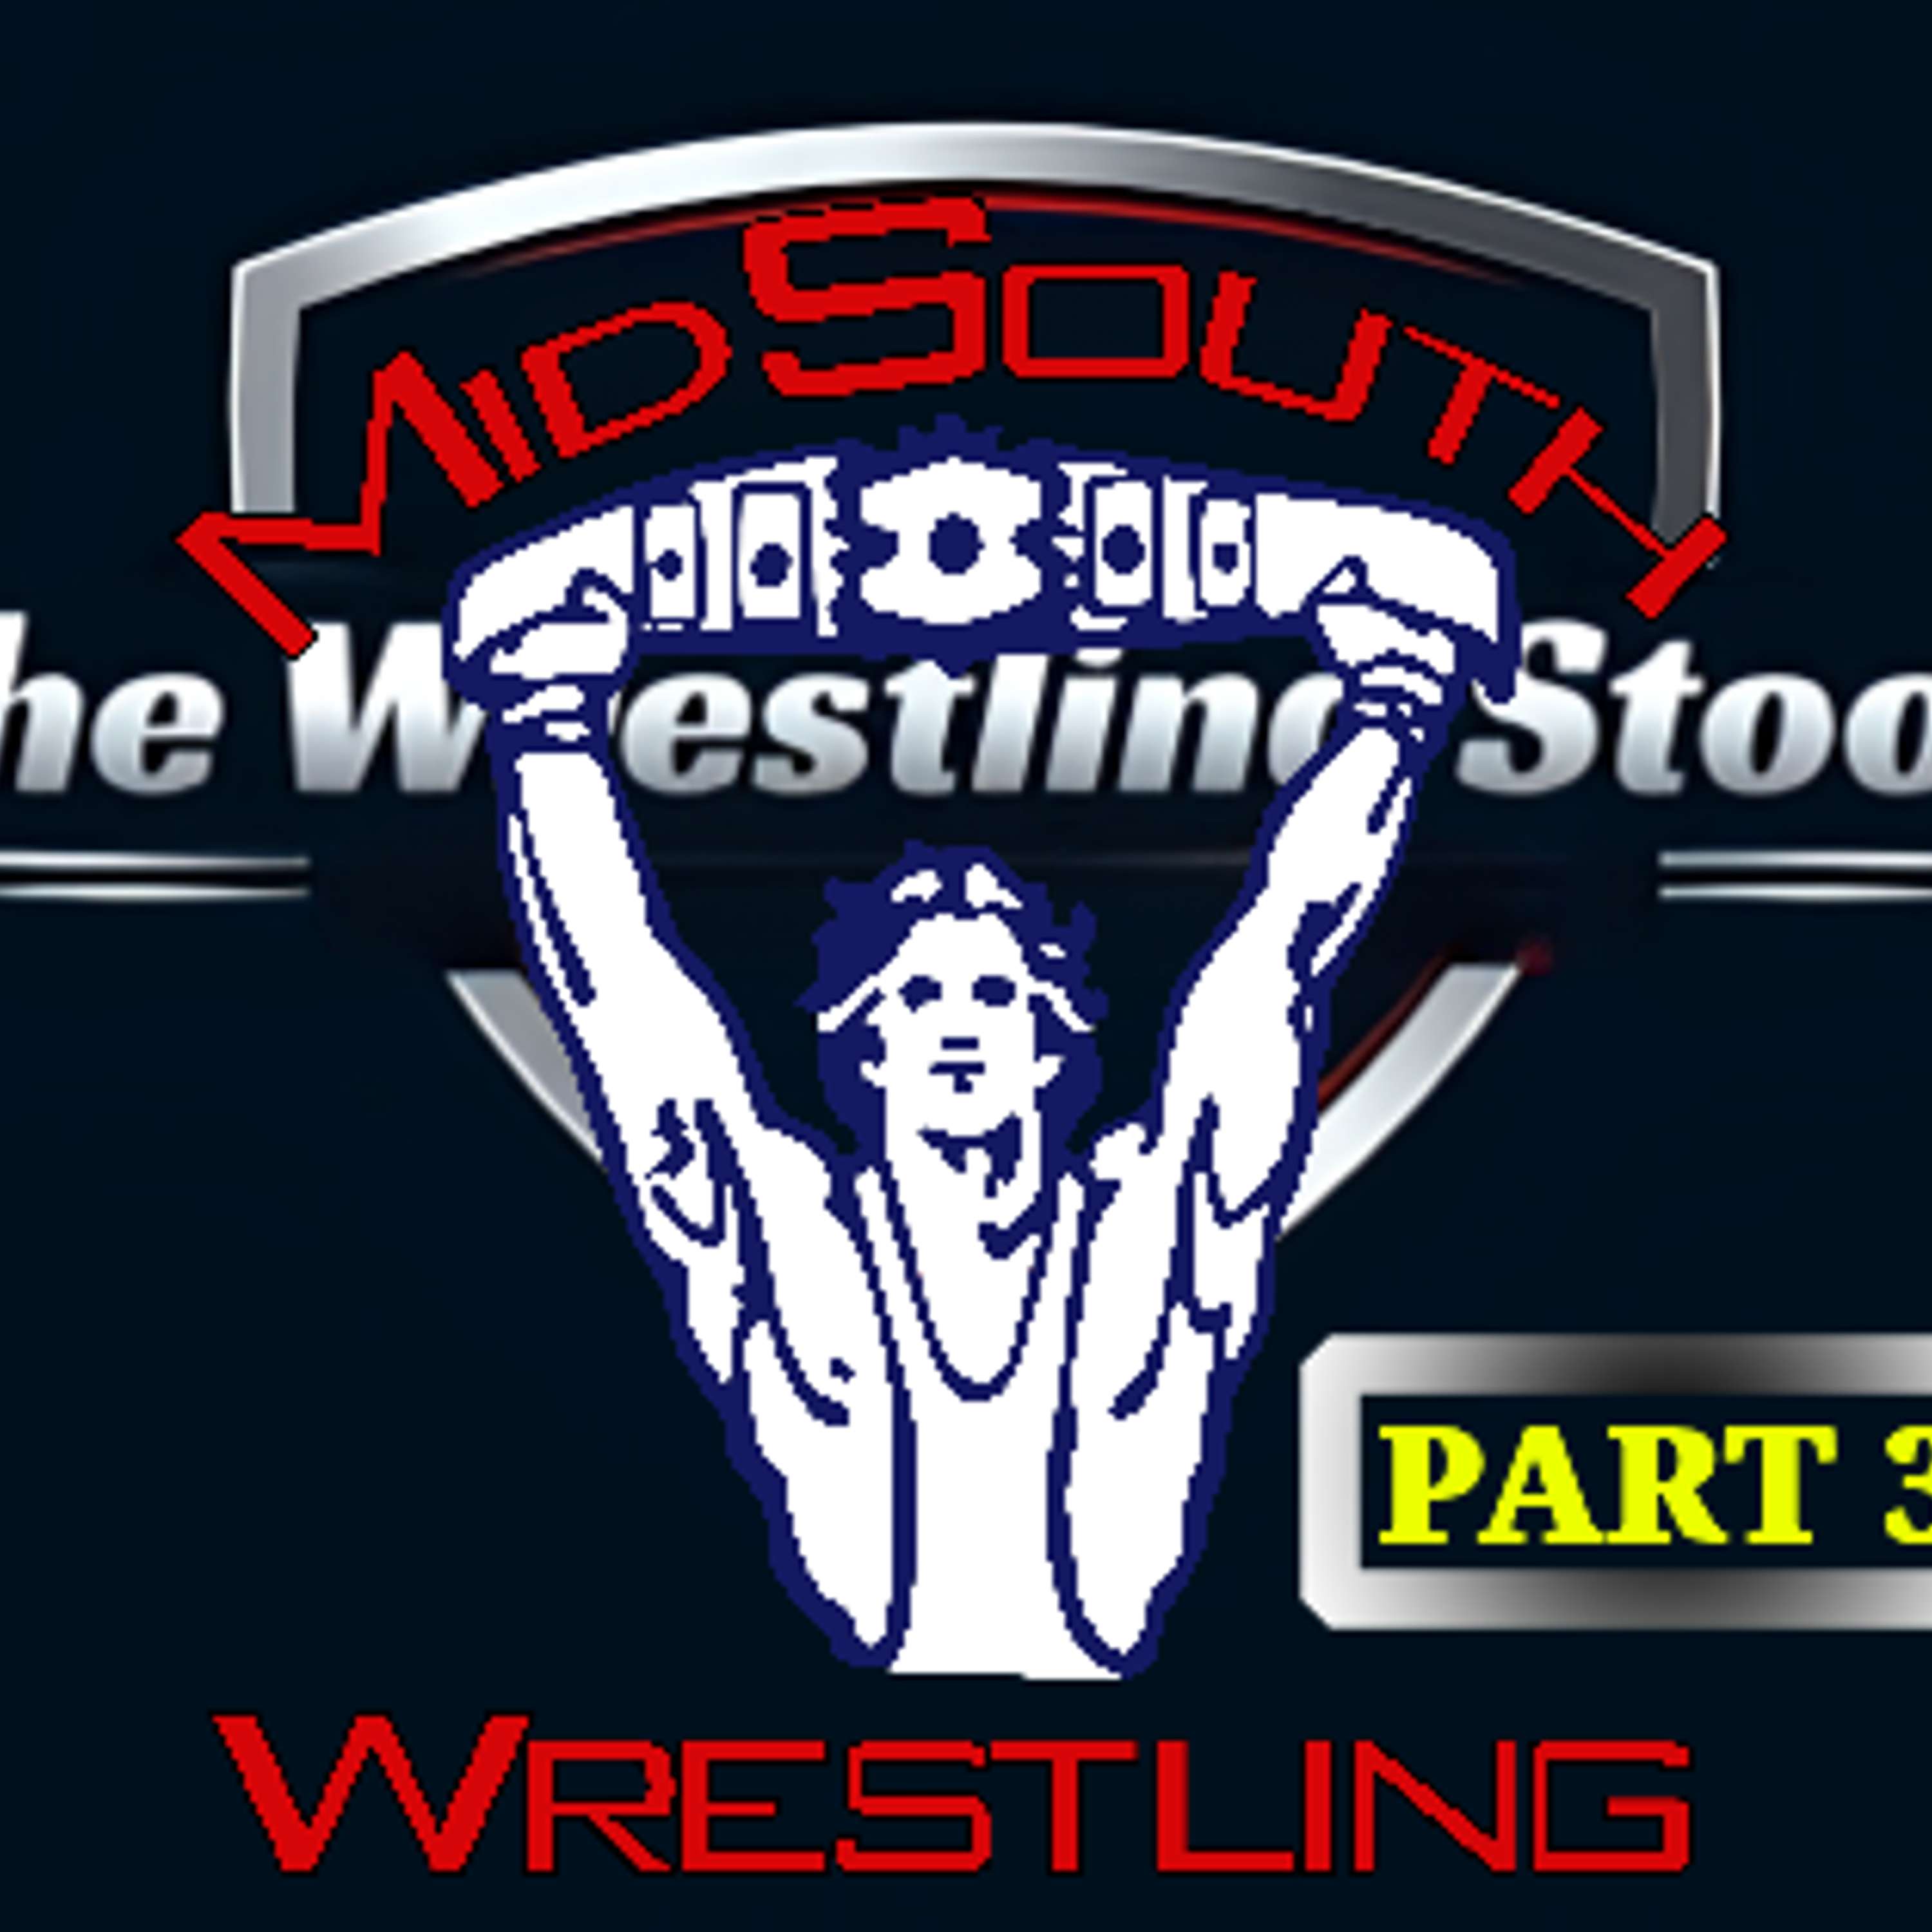 Episode 27: MID-SOUTH Pt. 3 (Bob Turns on Orndorff, Wins N.A. Title, & Dusty Arrives!)